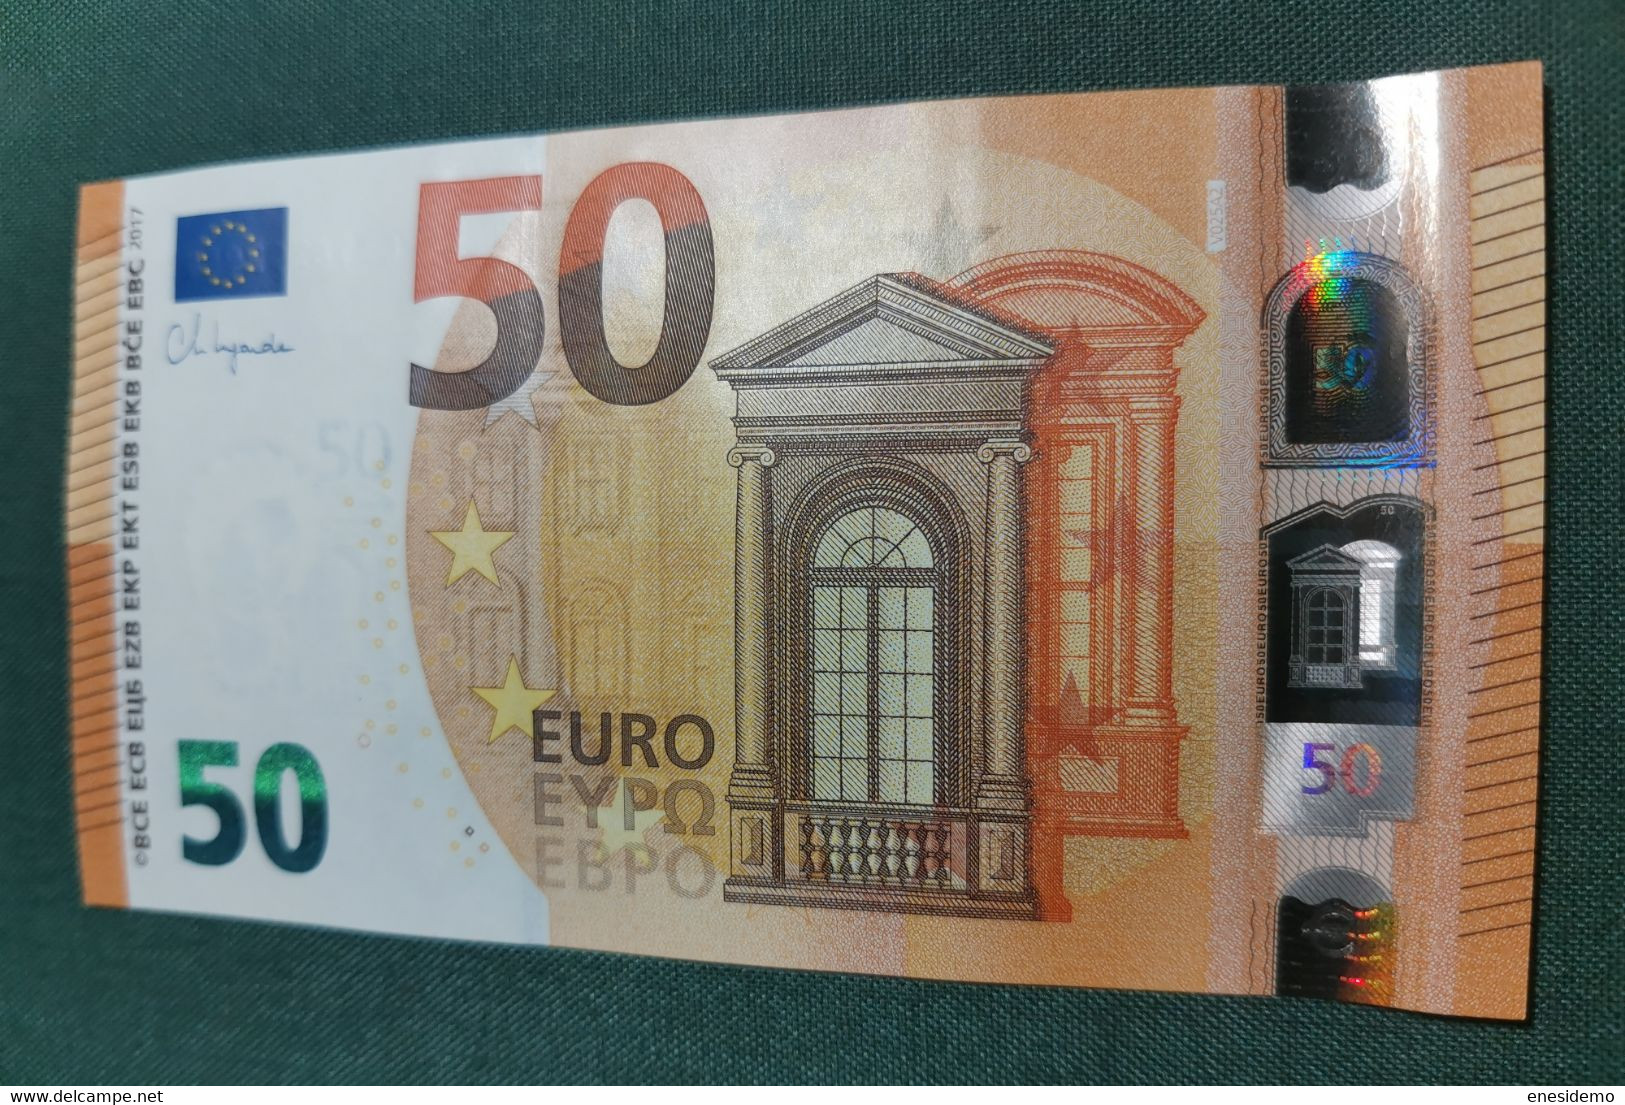 50 EURO SPAIN 2017 LAGARDE V025A2 VC SC FDS UNCIRCULATED PERFECT